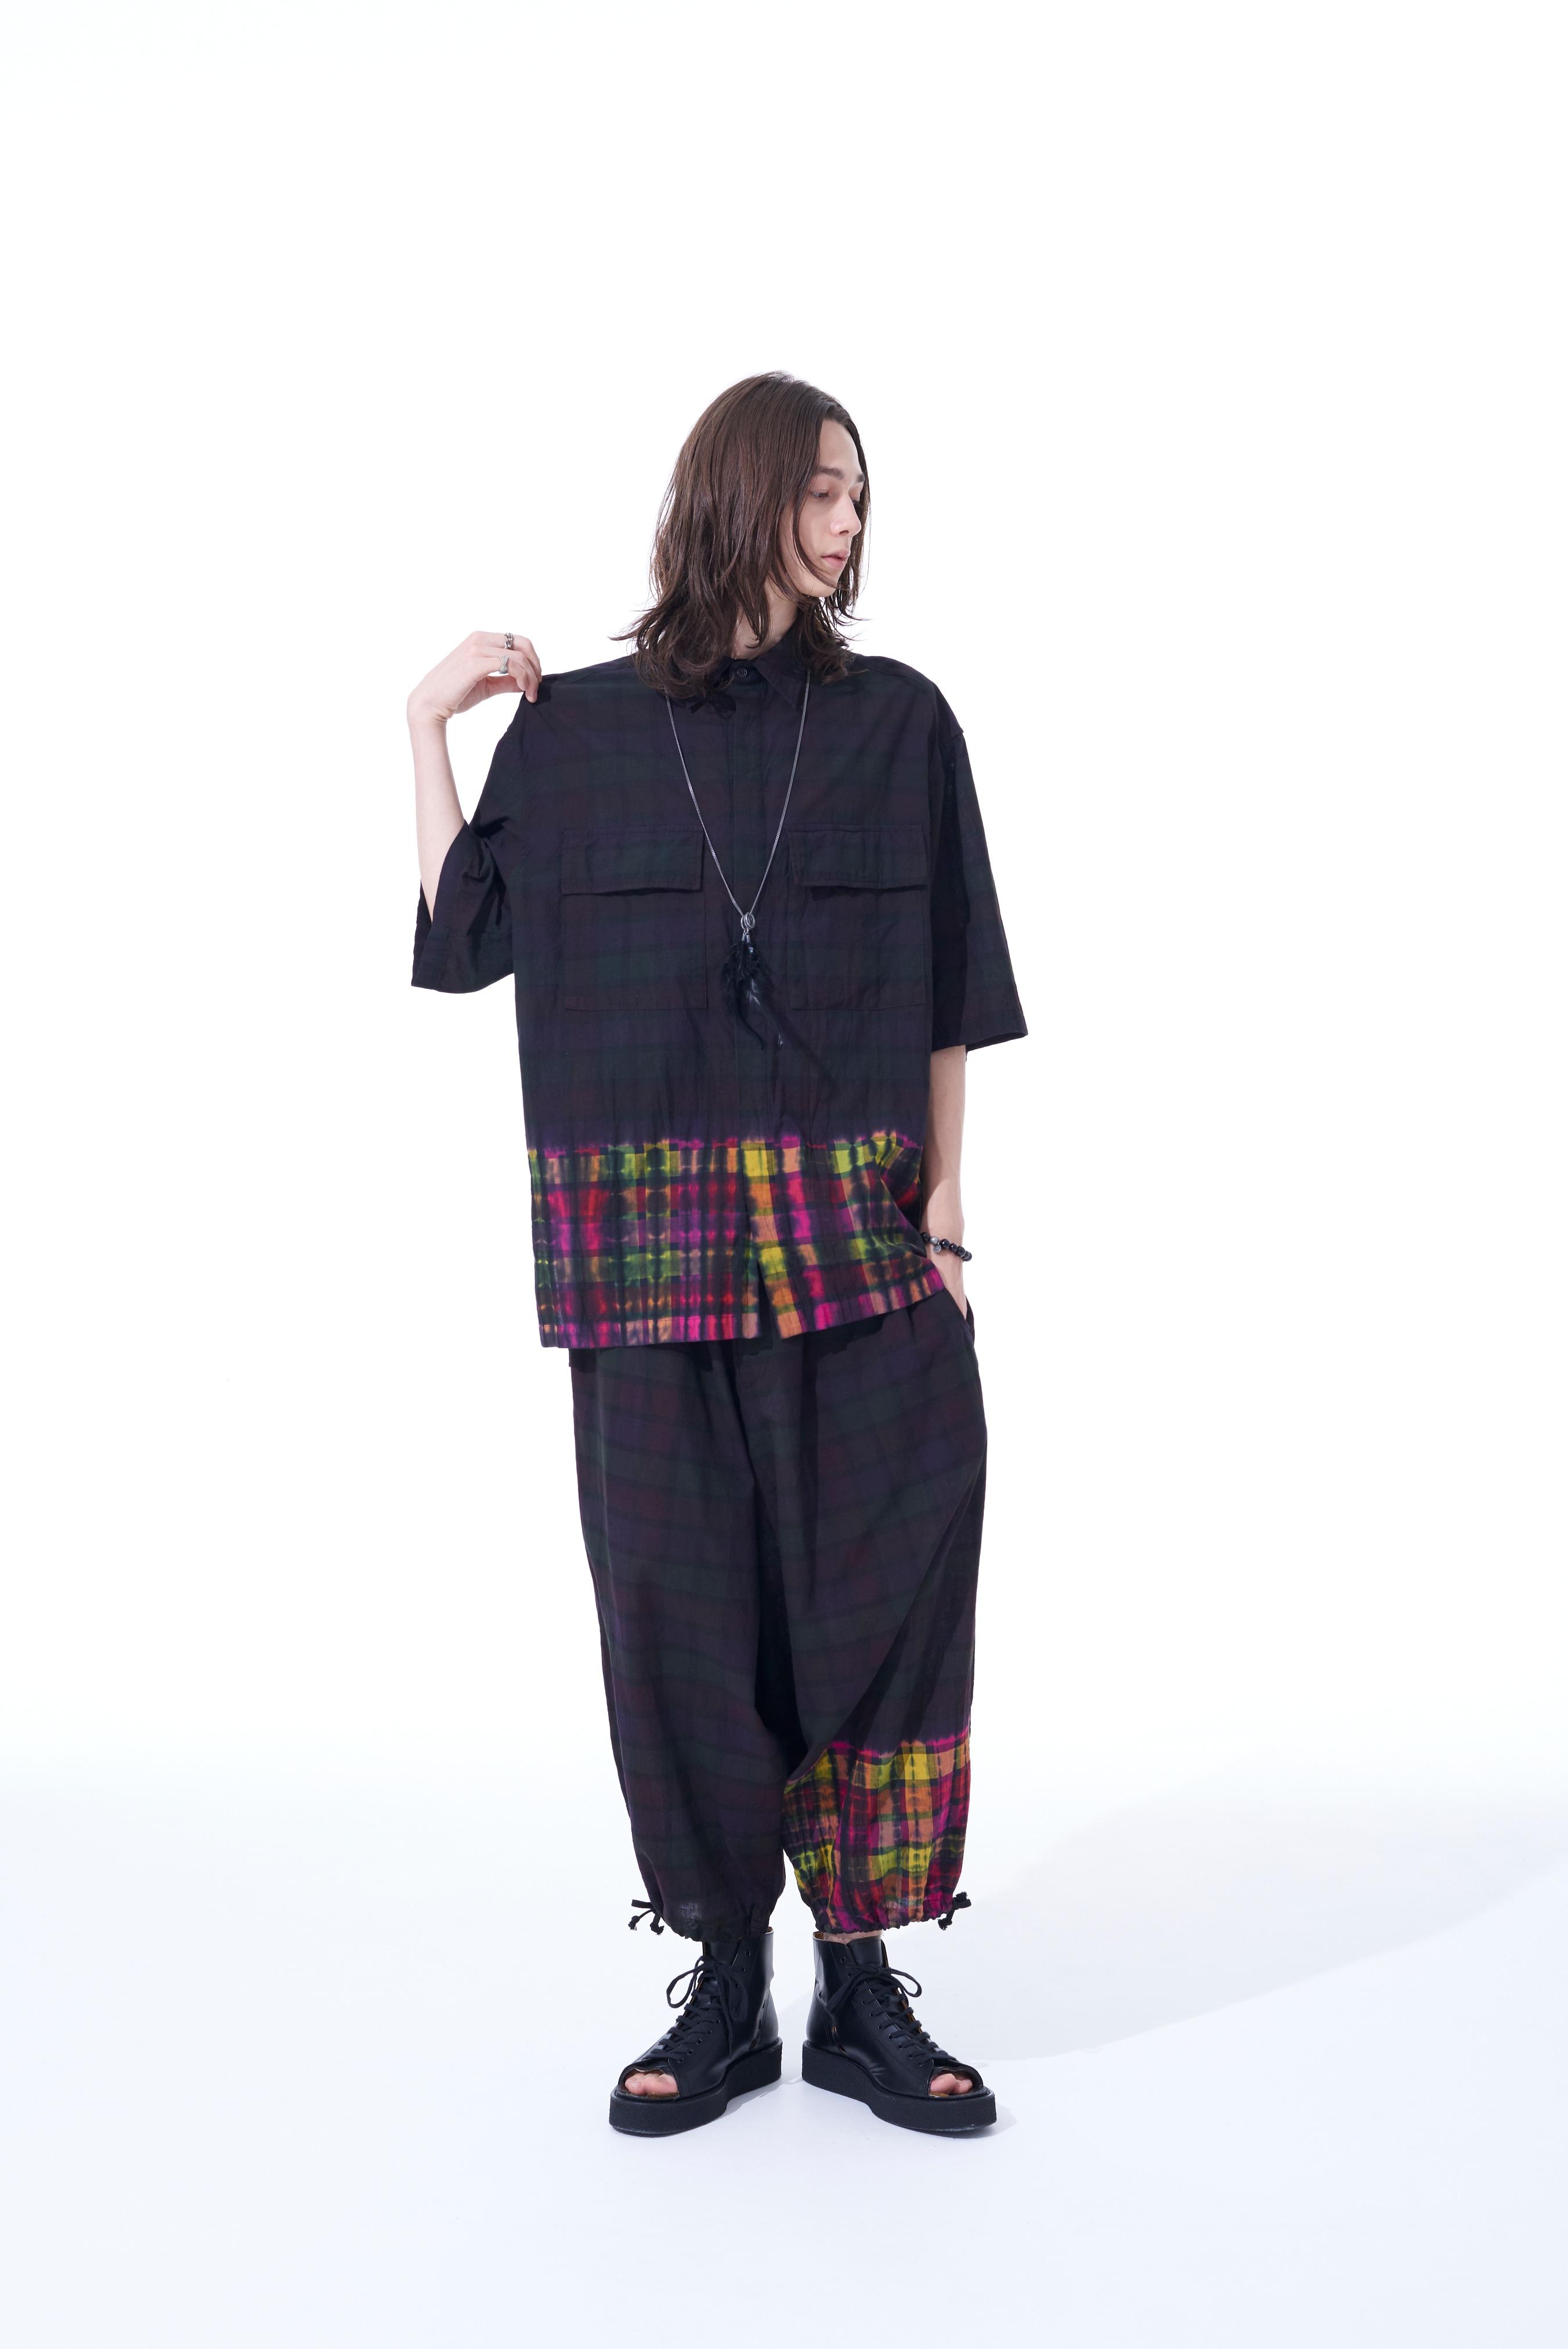 INDIAN MADRAS CHECK TIE-DIE HALF-SLEEVE BIG SHIRT WITH FLAP POCKETS